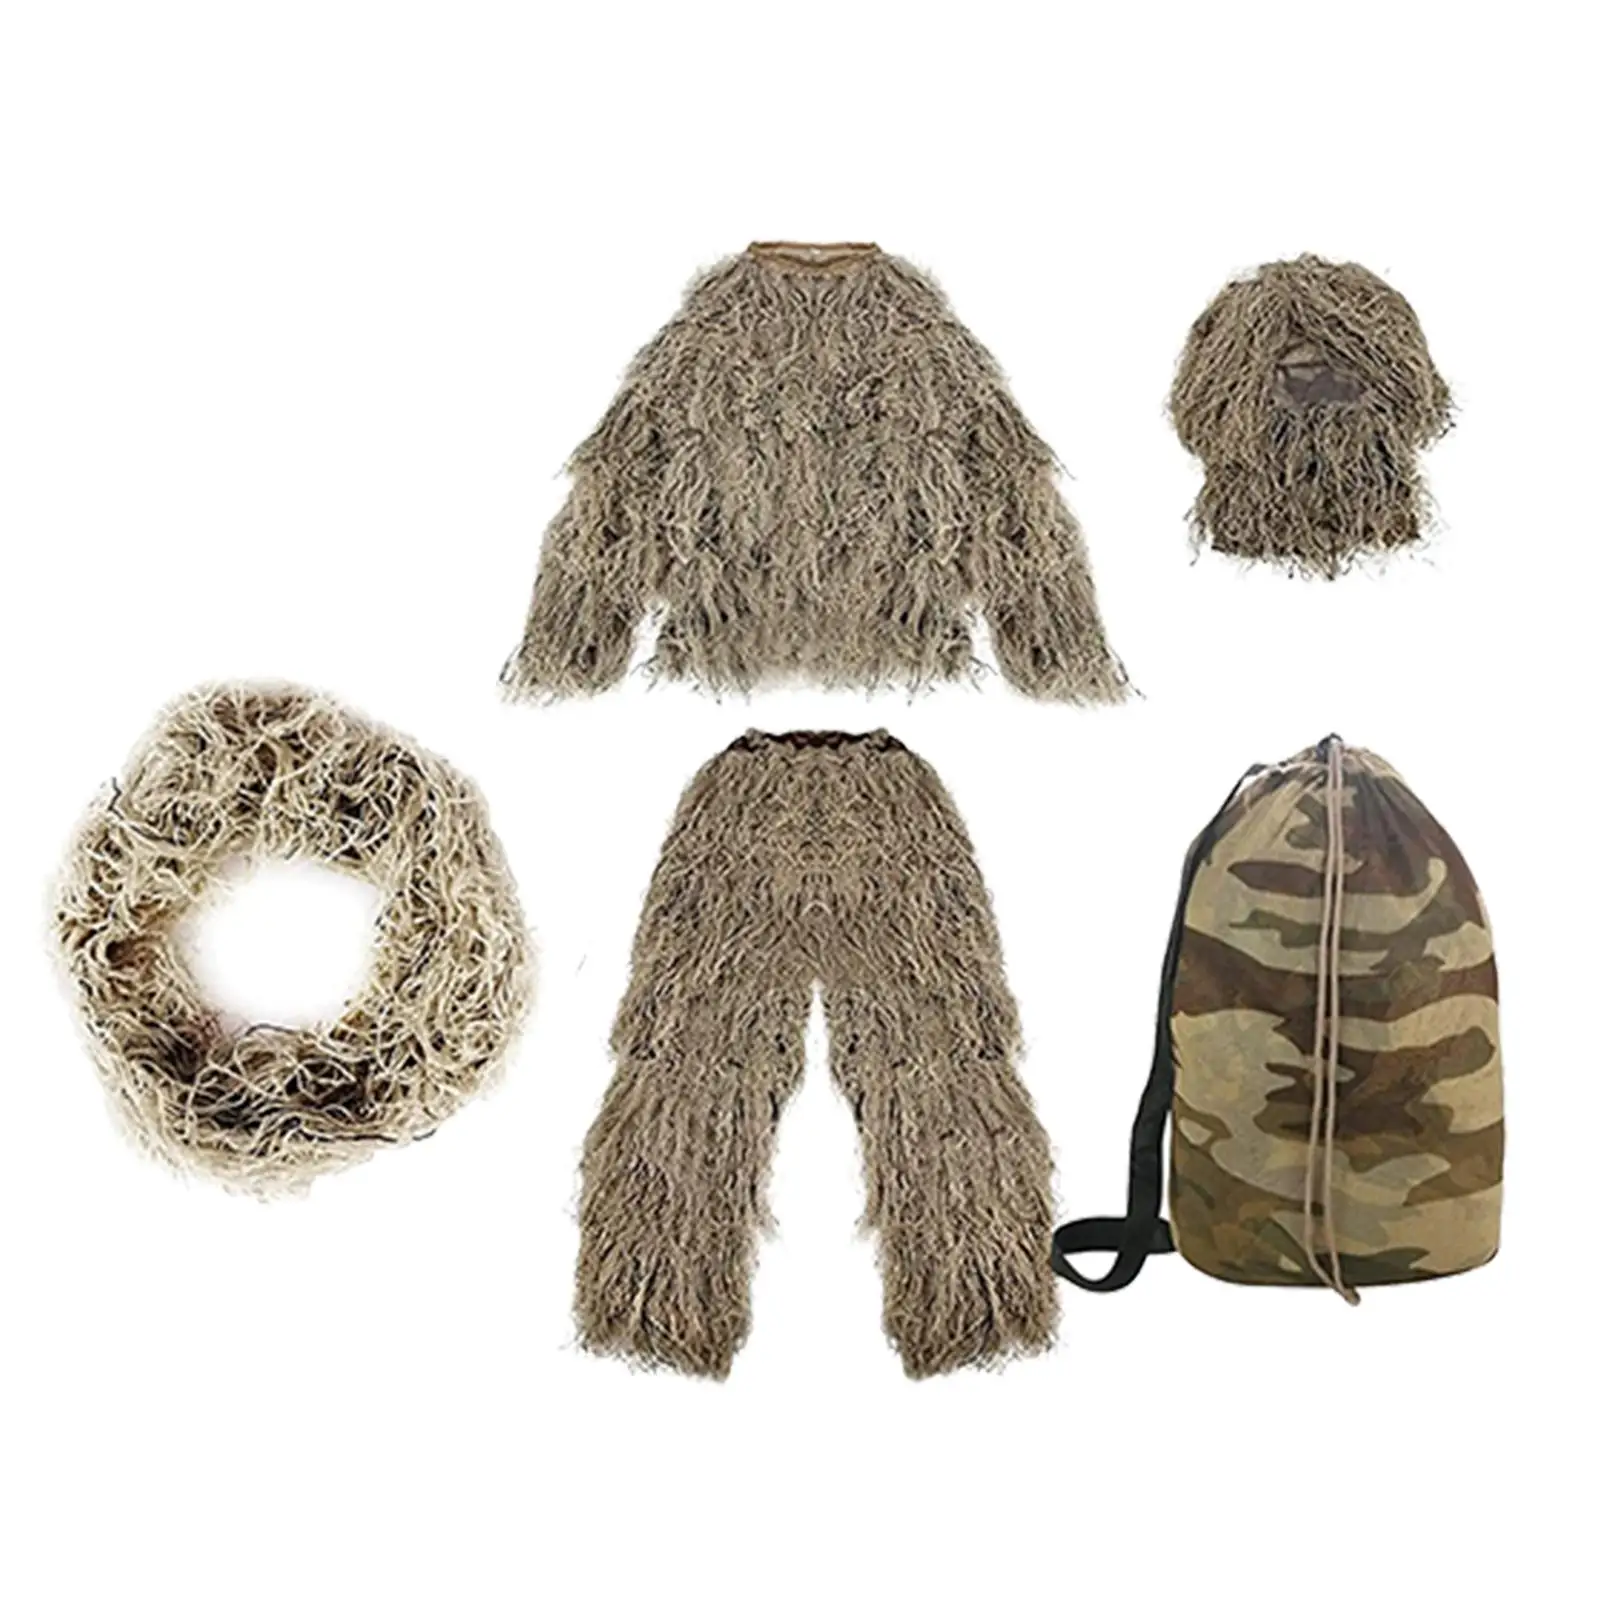 Ghillie Suit for Men Jacket Outfit Lightweight Disguise Woodland Pants Hat for Costume Halloween Camping Fishing Photography